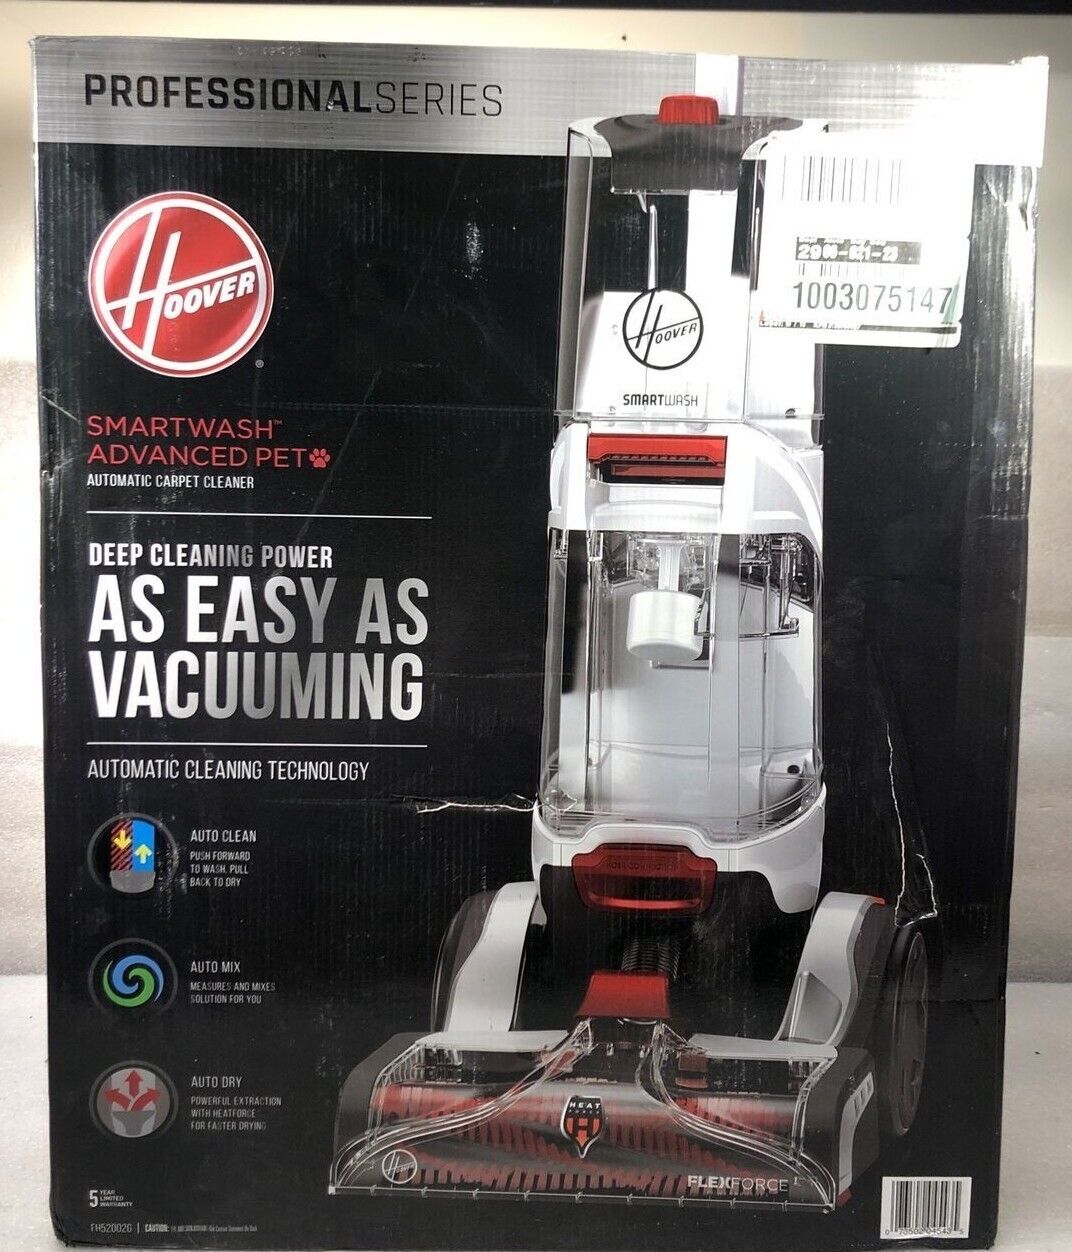 New Hoover Professional Series Smartwash Advanced Automatic Carpet Cleaner